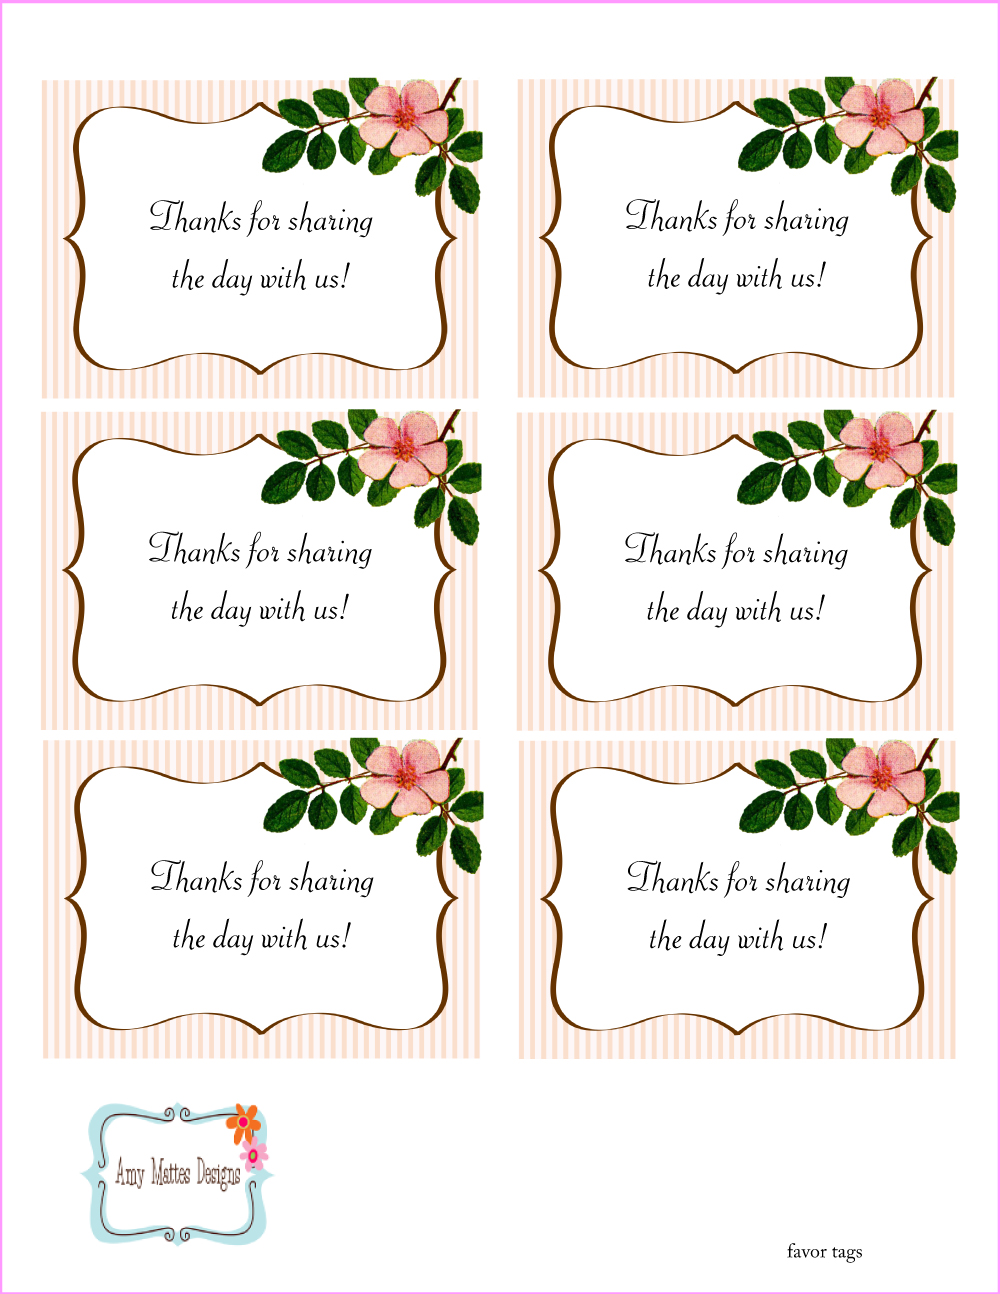 6-best-images-of-happy-mother-s-day-printable-tags-happy-mother-s-day